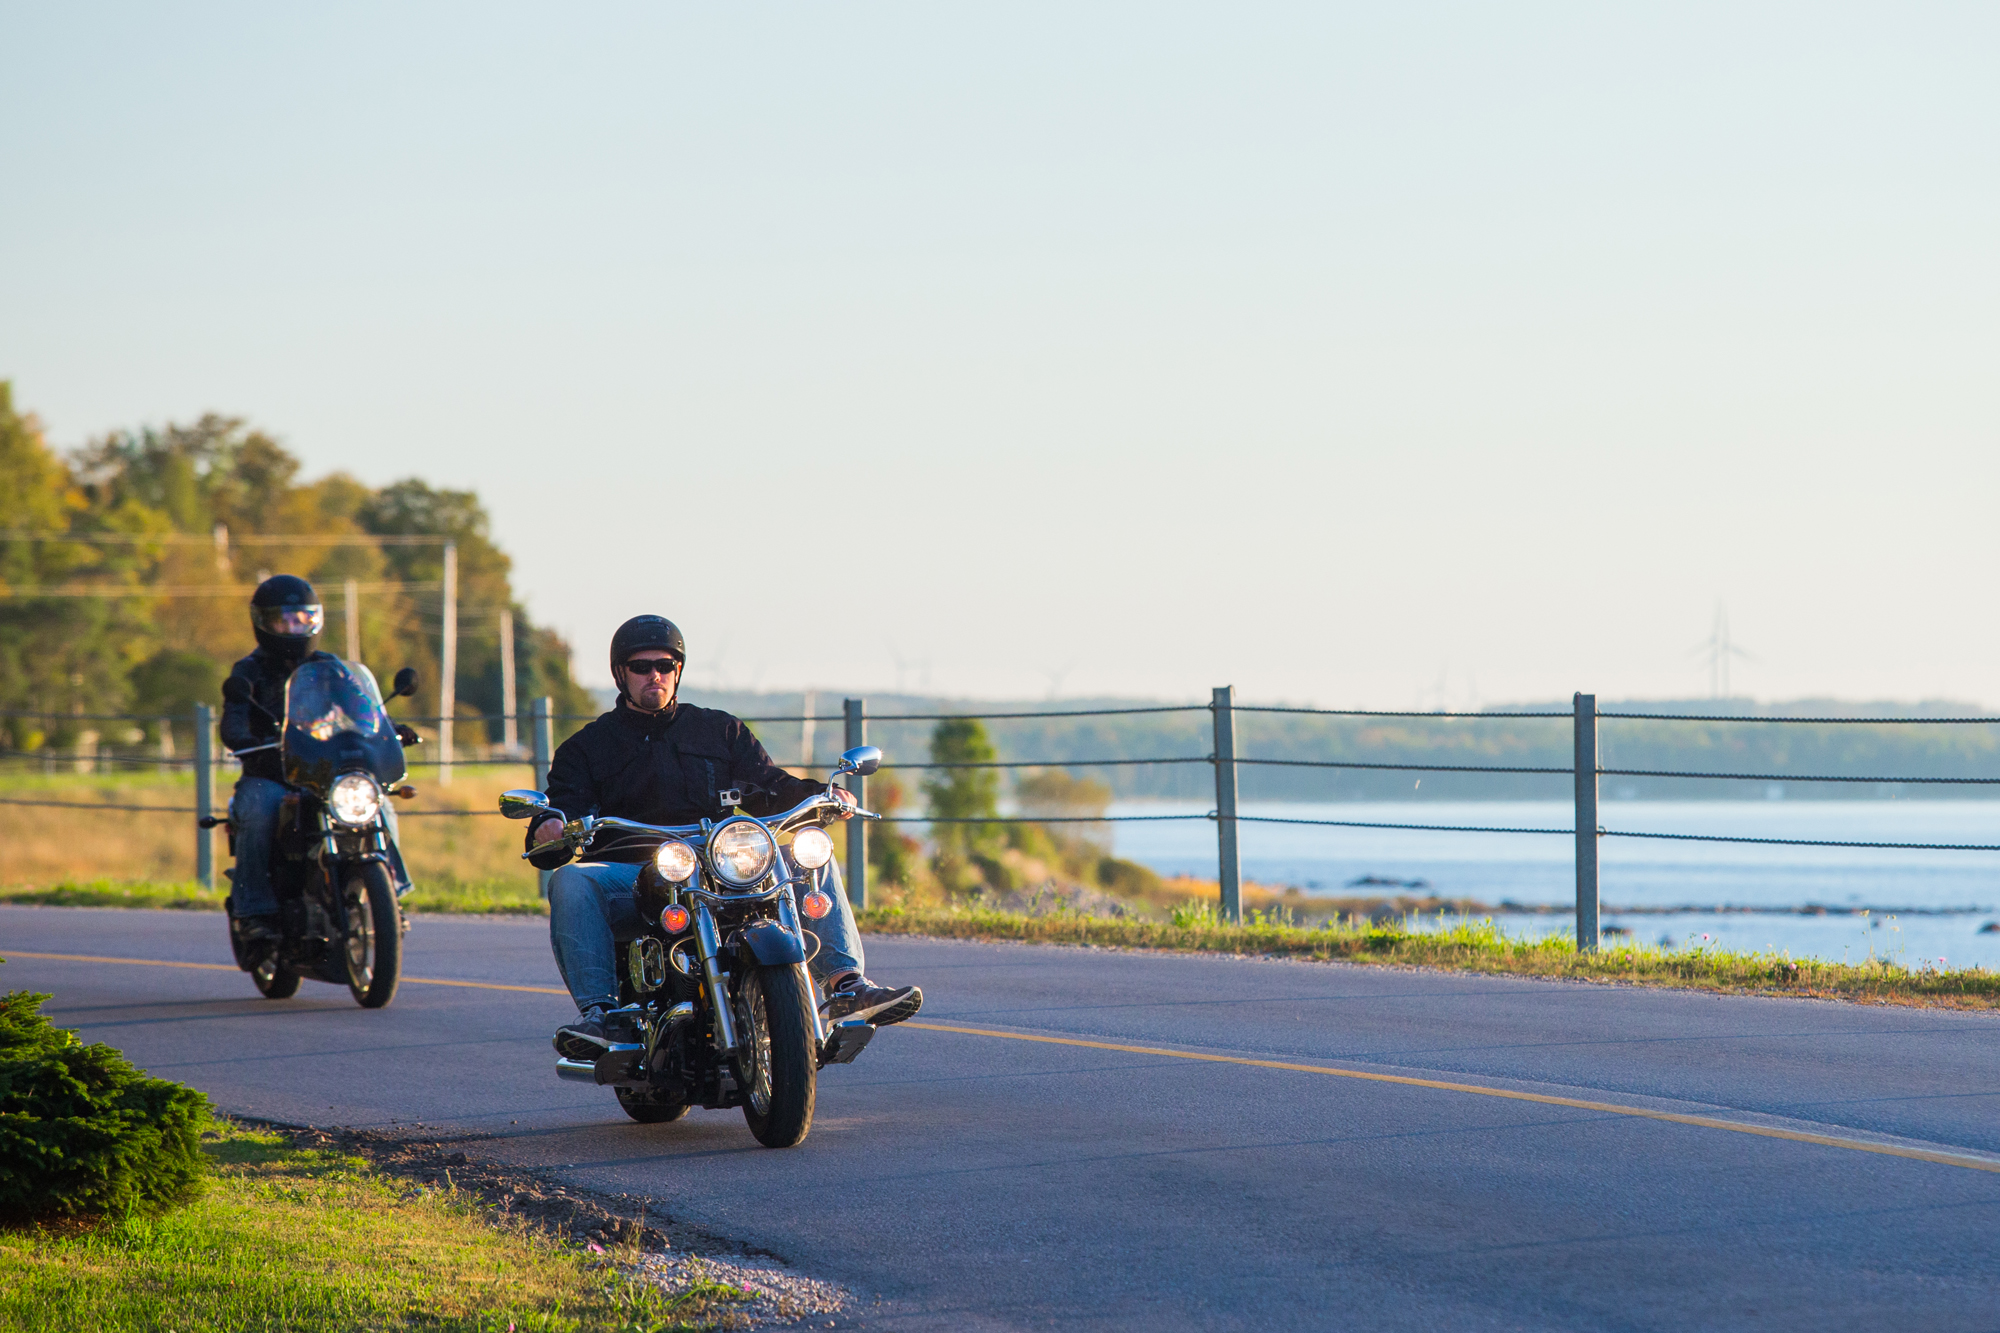 Two motorcyclers on Lakeshore motorcycle tour beside shoreline